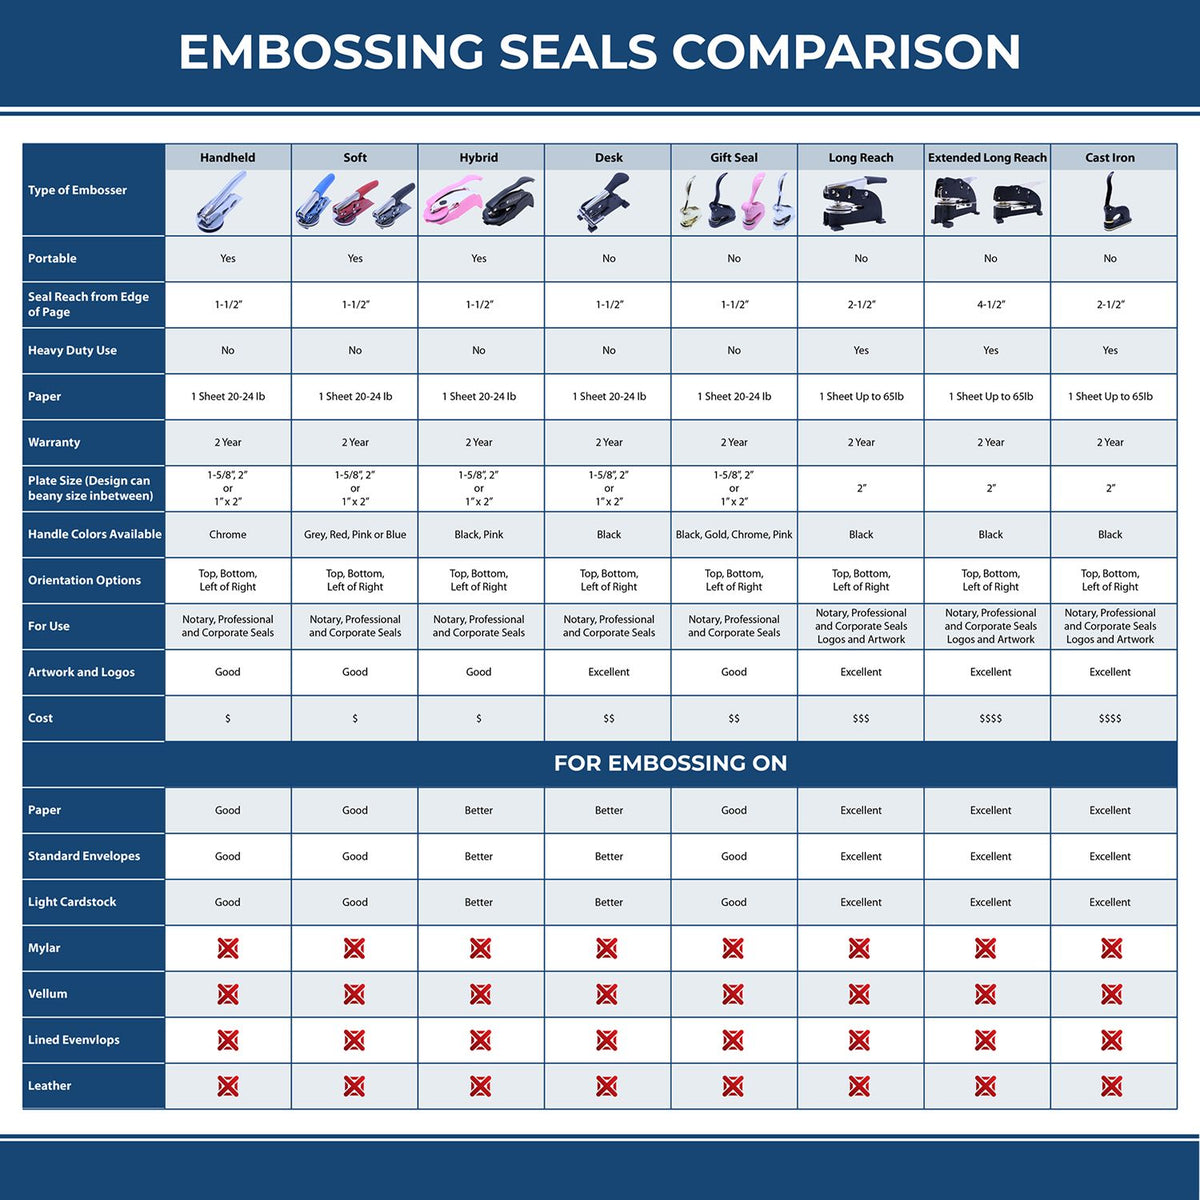 A comparison chart for the different types of mount models available for the Arizona Desk Surveyor Seal Embosser.